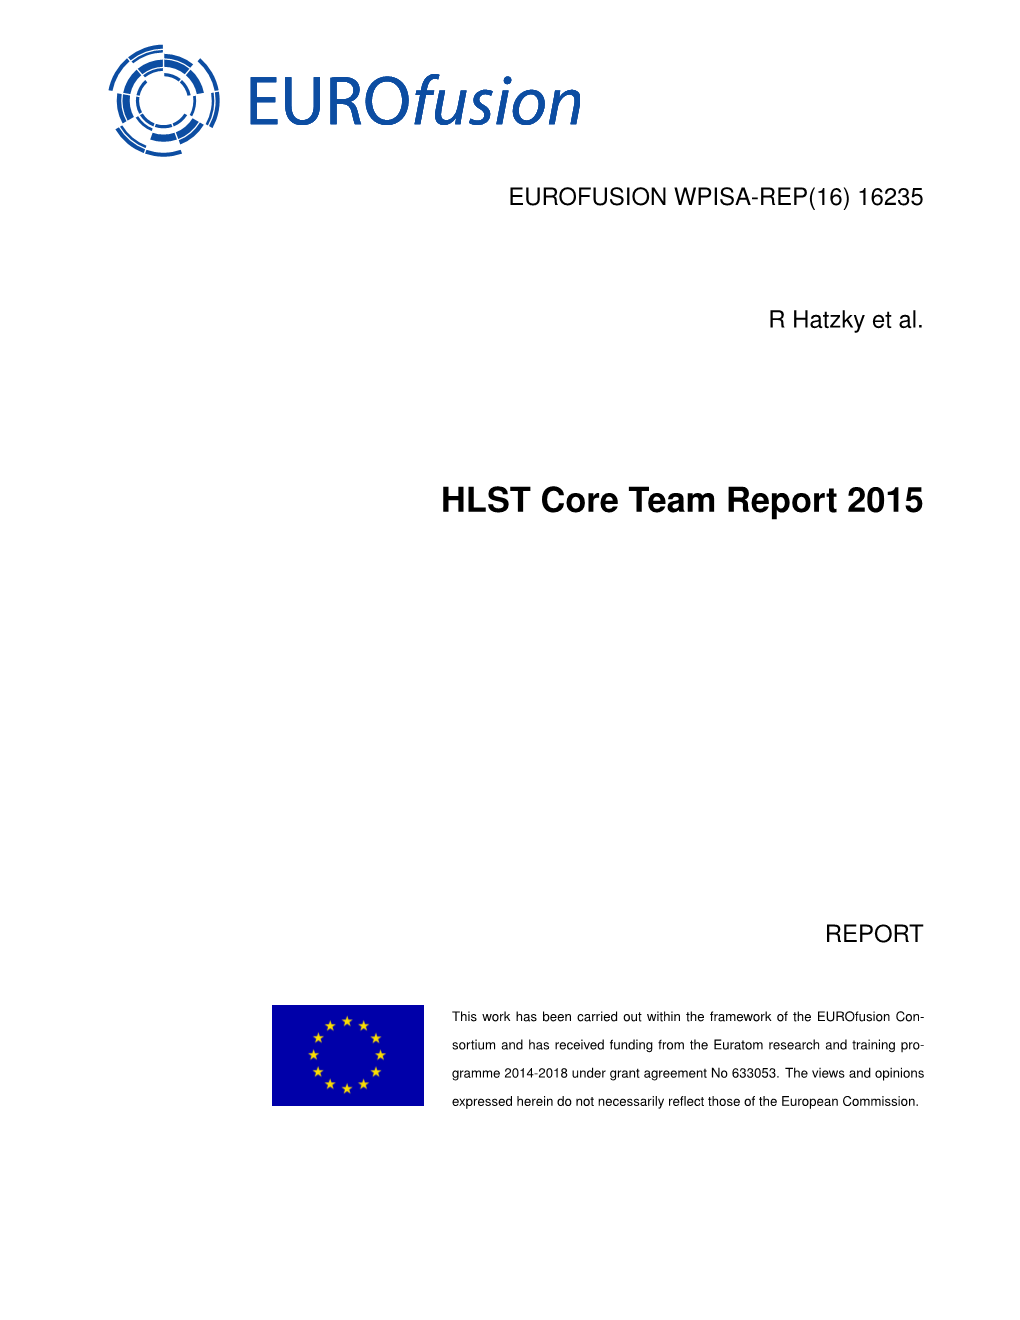 HLST Core Team Report 2015